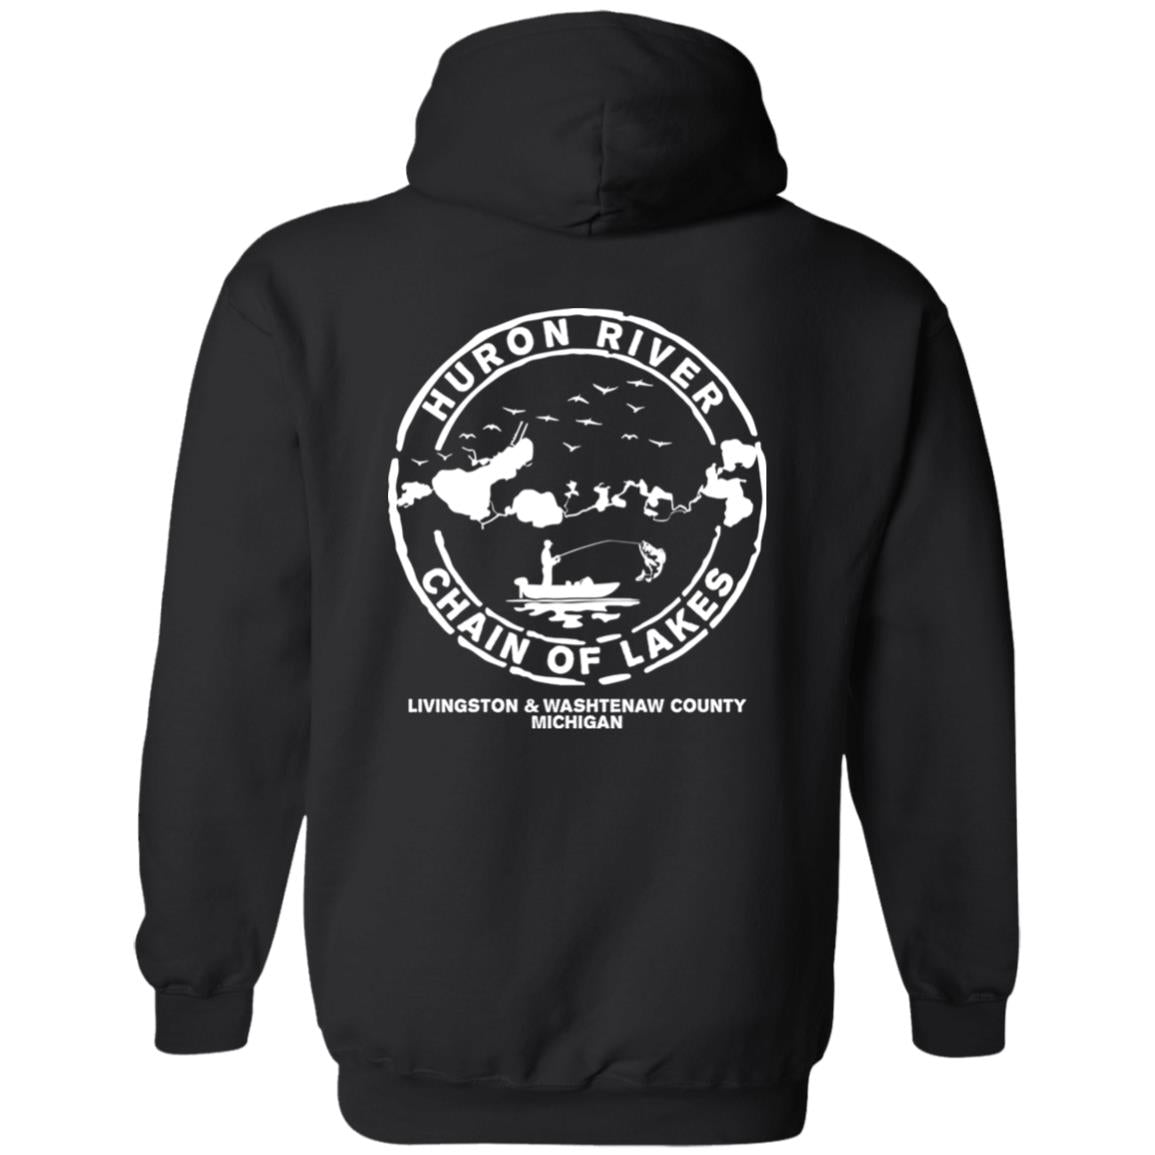 ***2 SIDED***  HRCL FL - Boats N Hoes - 2 Sided G185 Pullover Hoodie